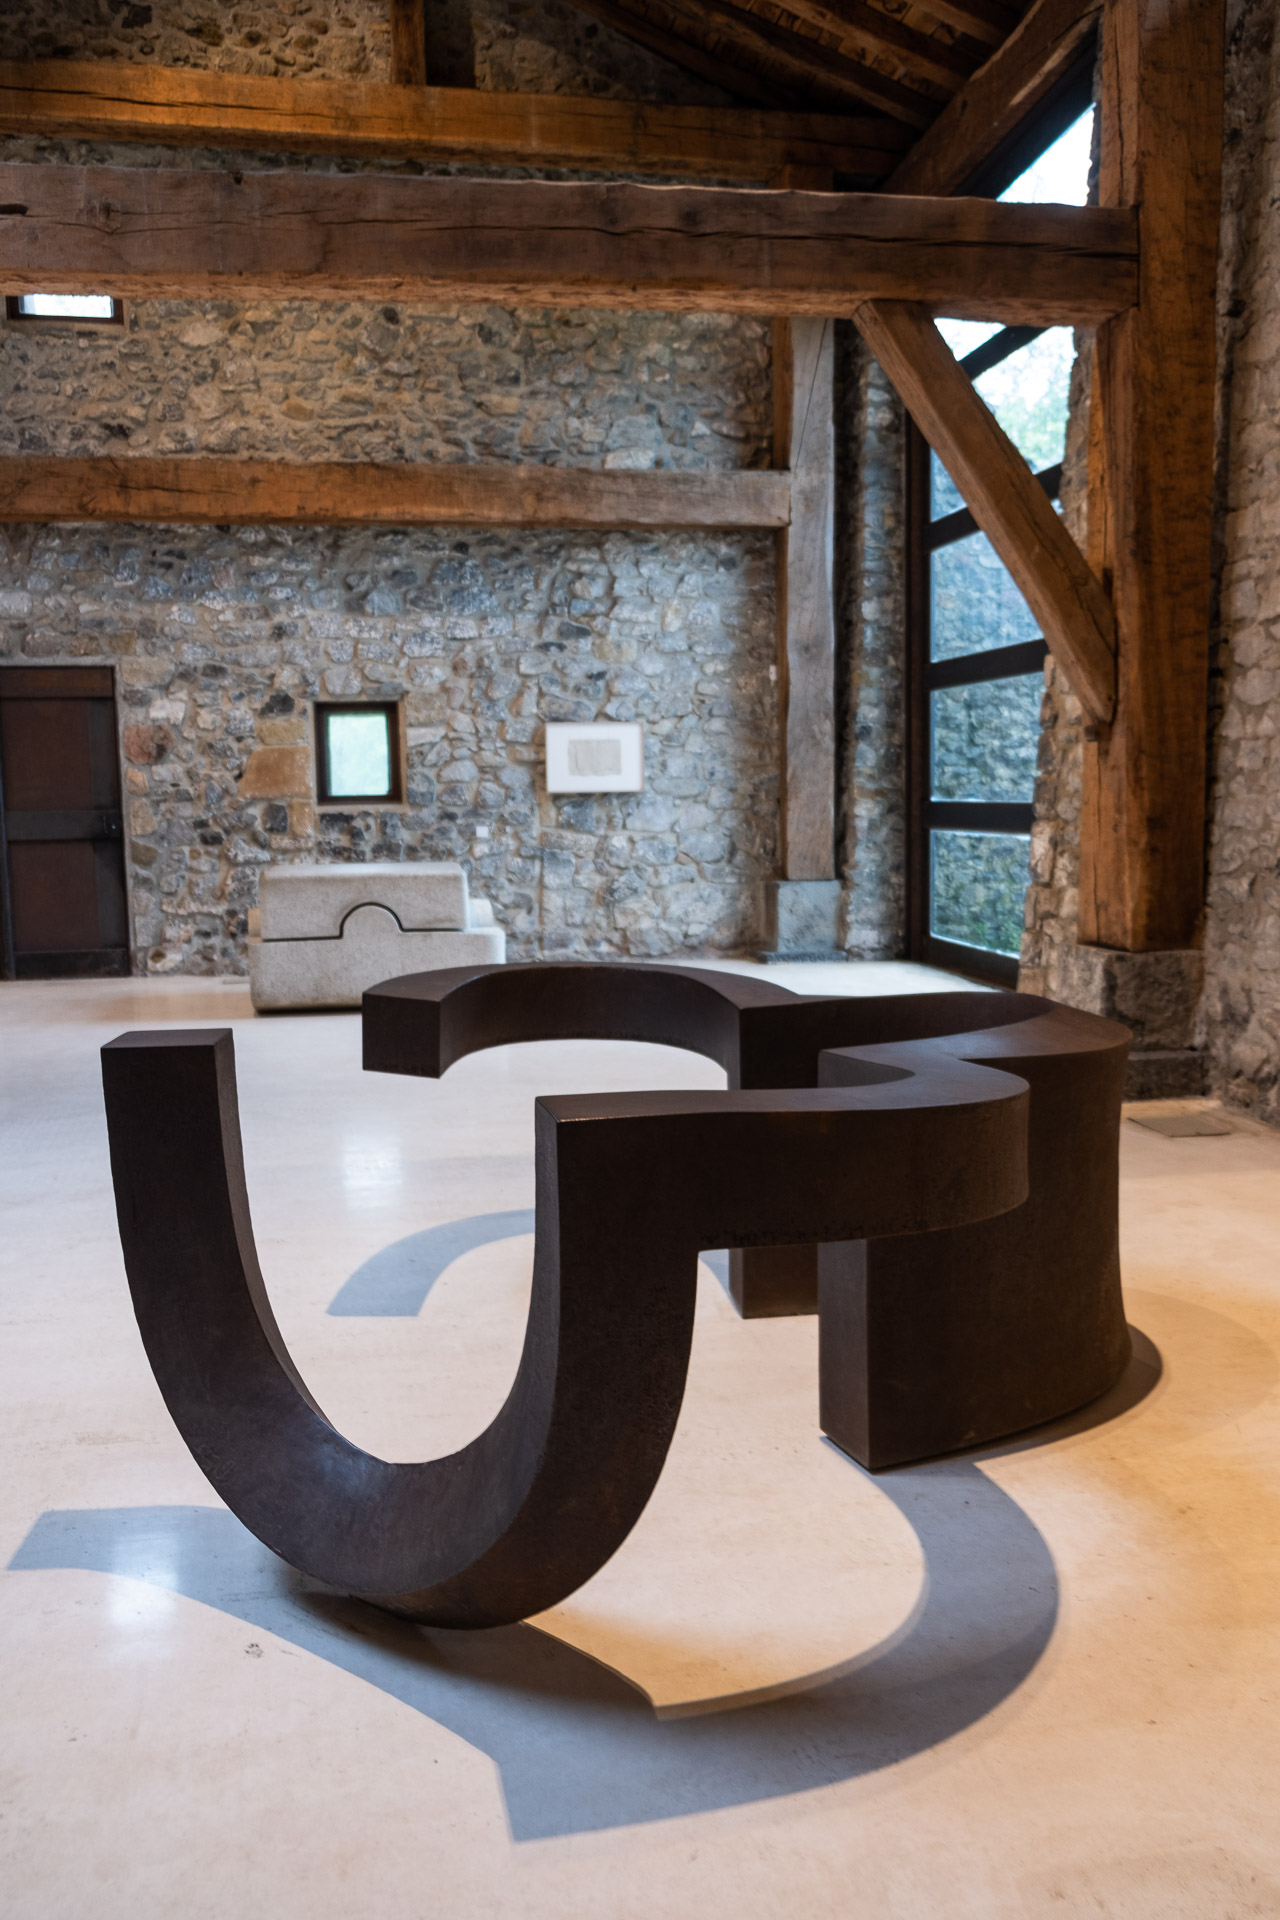 detail from inside the Chillida Leku museum 